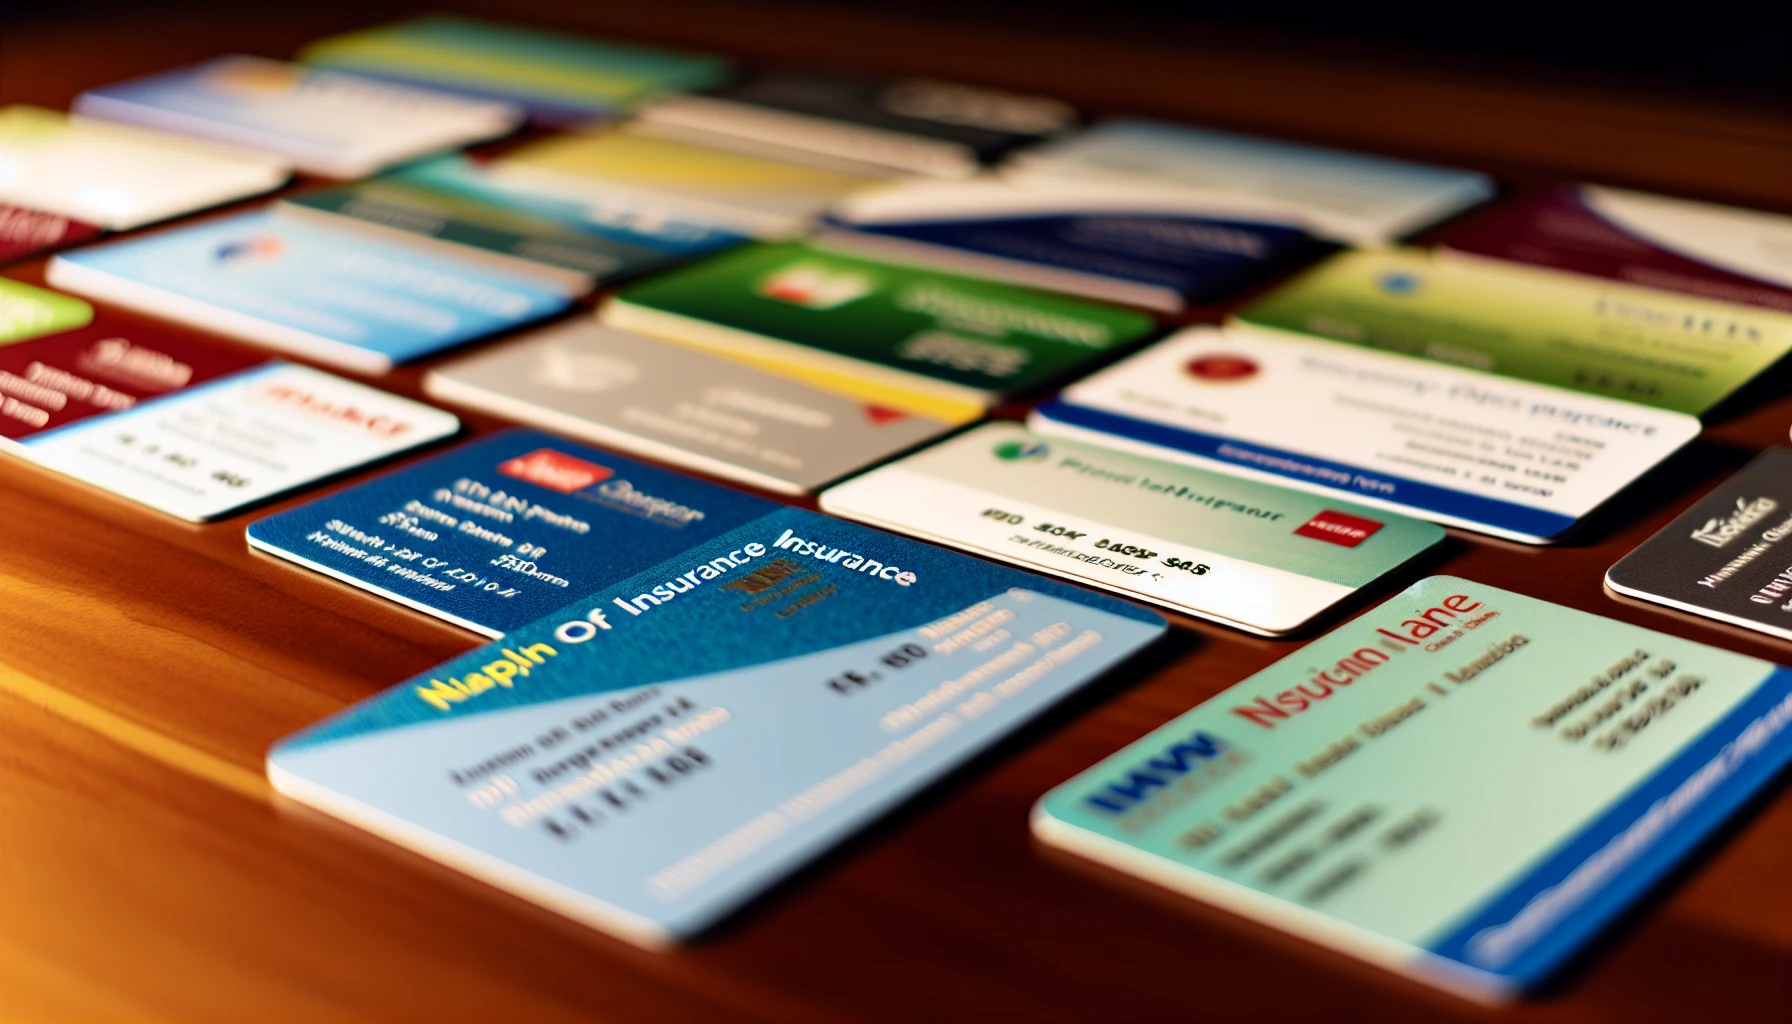 Insurance cards for health, dental, and vision coverage